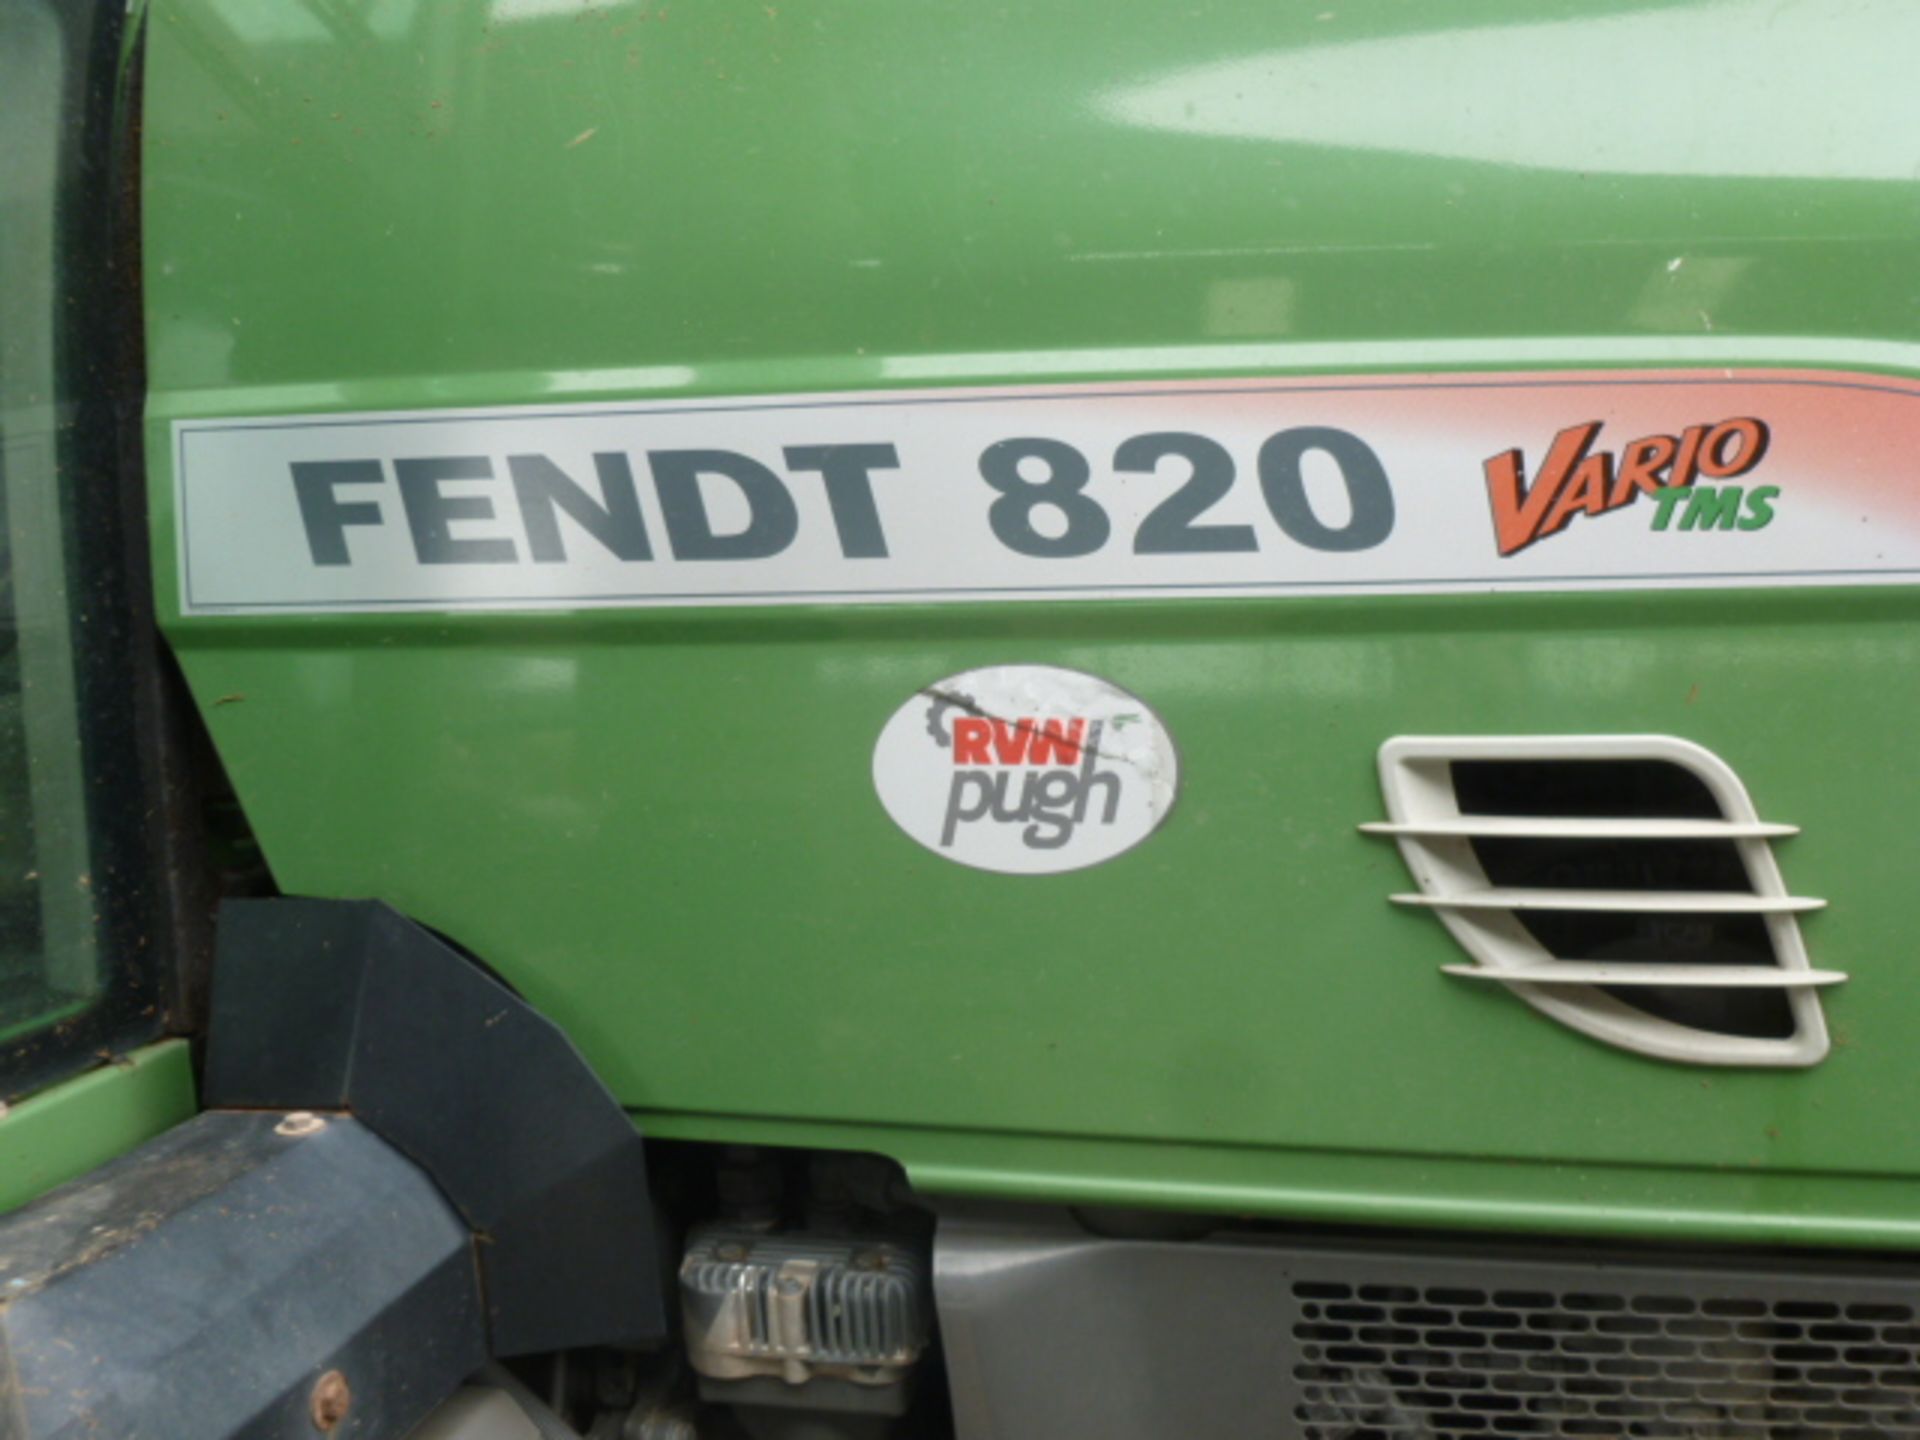 FENDT 830 VARIO TMS TRACTOR WITH FRONT LINKAGE (4700 HOURS) REG CU57 WML - Image 2 of 10